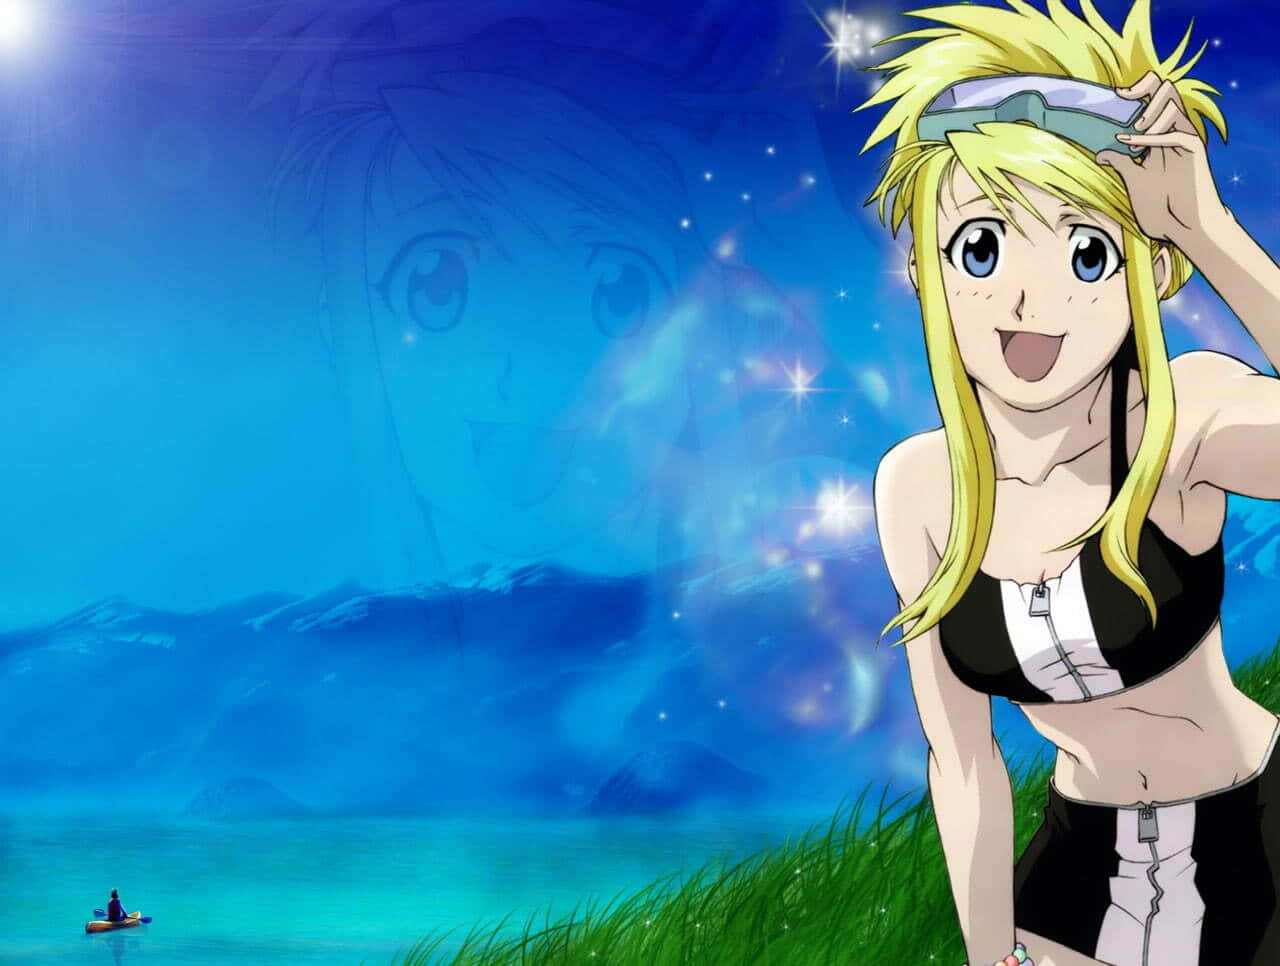 Winry Rockbell - The talented young mechanic Wallpaper